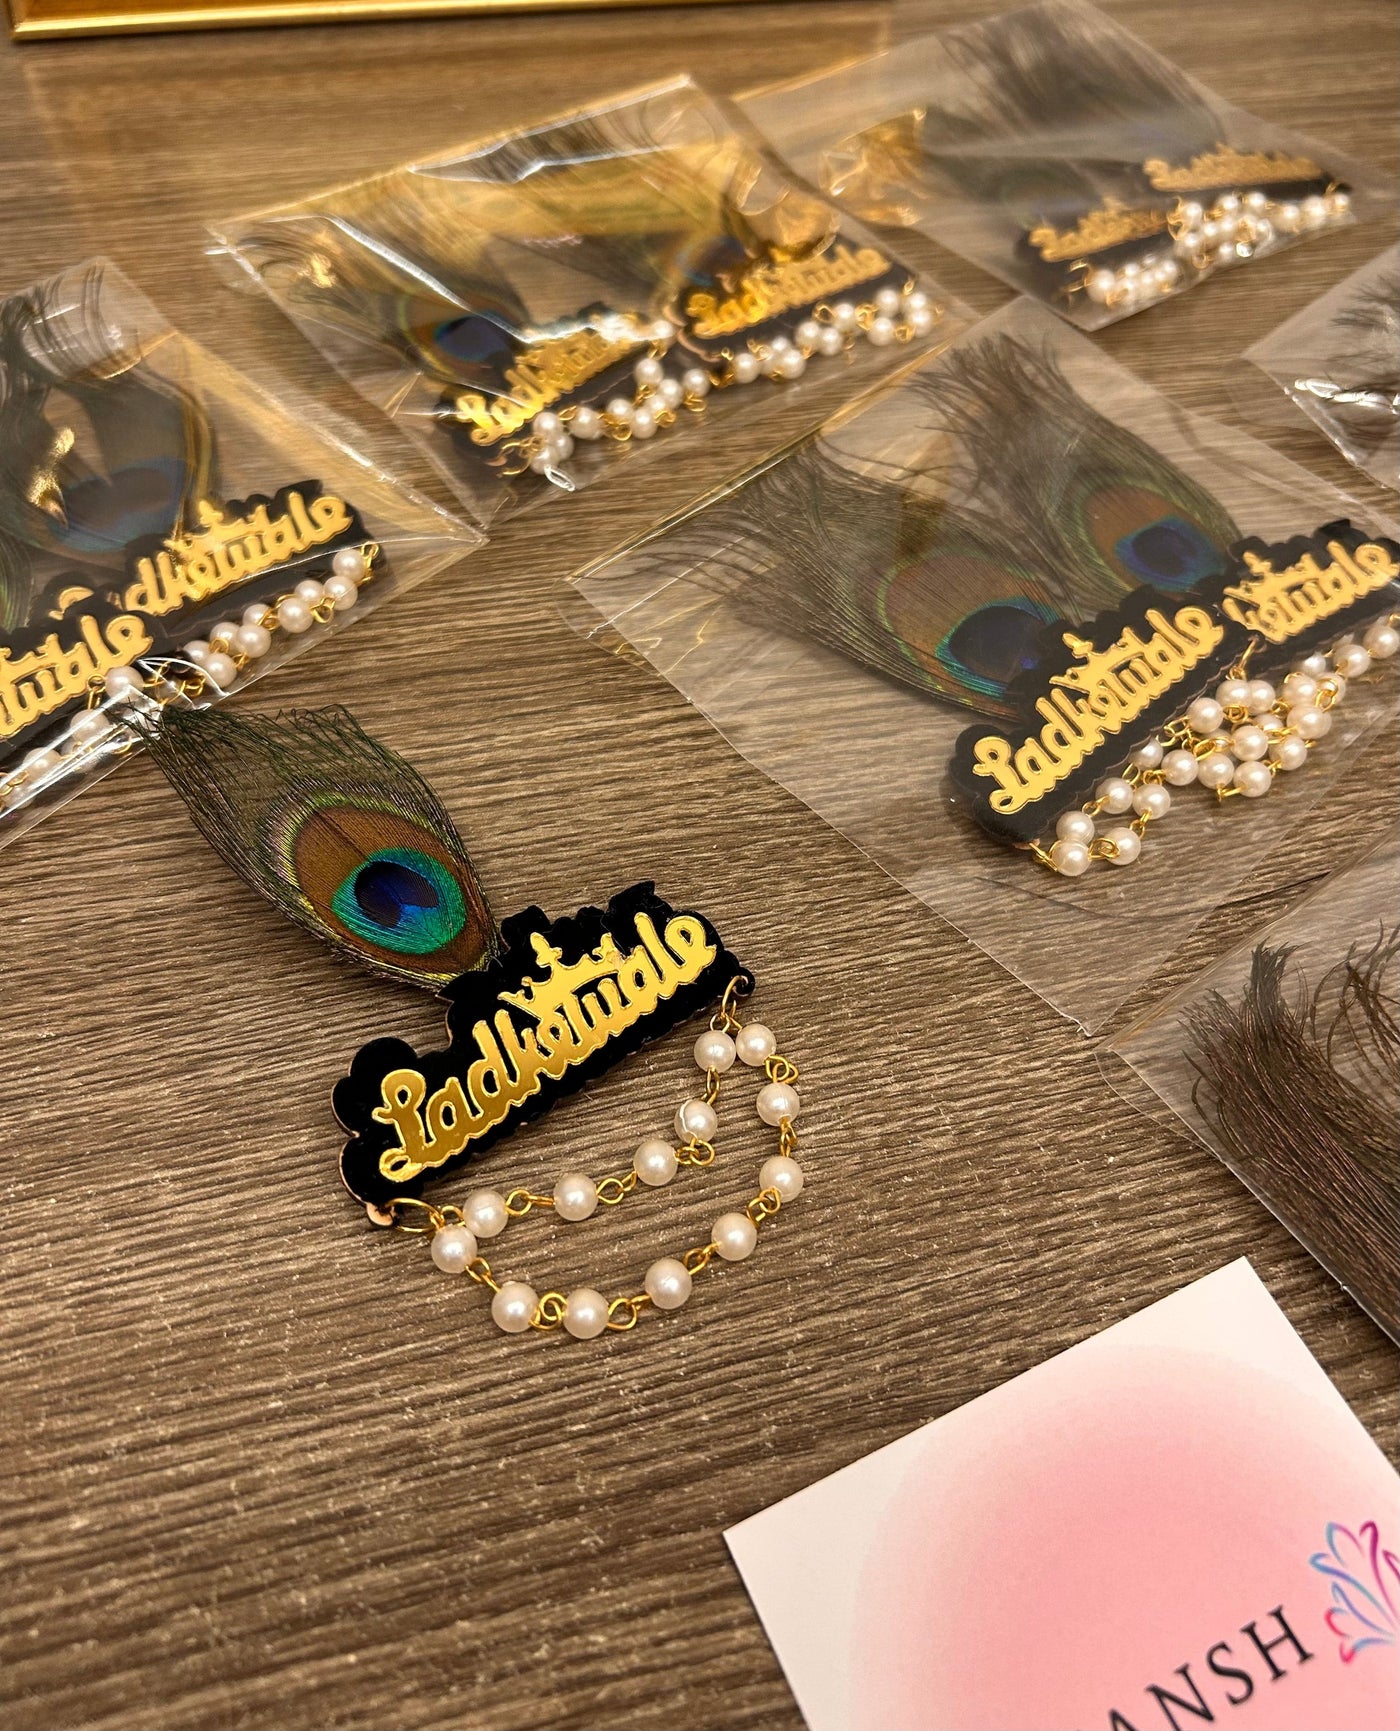 35 Rs each on buying 🏷in bulk | Call 📞 at 8619550223 Broaches LAMANSH® Ladkewale Brooches with Mor pankh 🦚 for Barati swagat in wedding / Brooches for Groom side / Quirky Brooches for Guests in Shaadi🎉